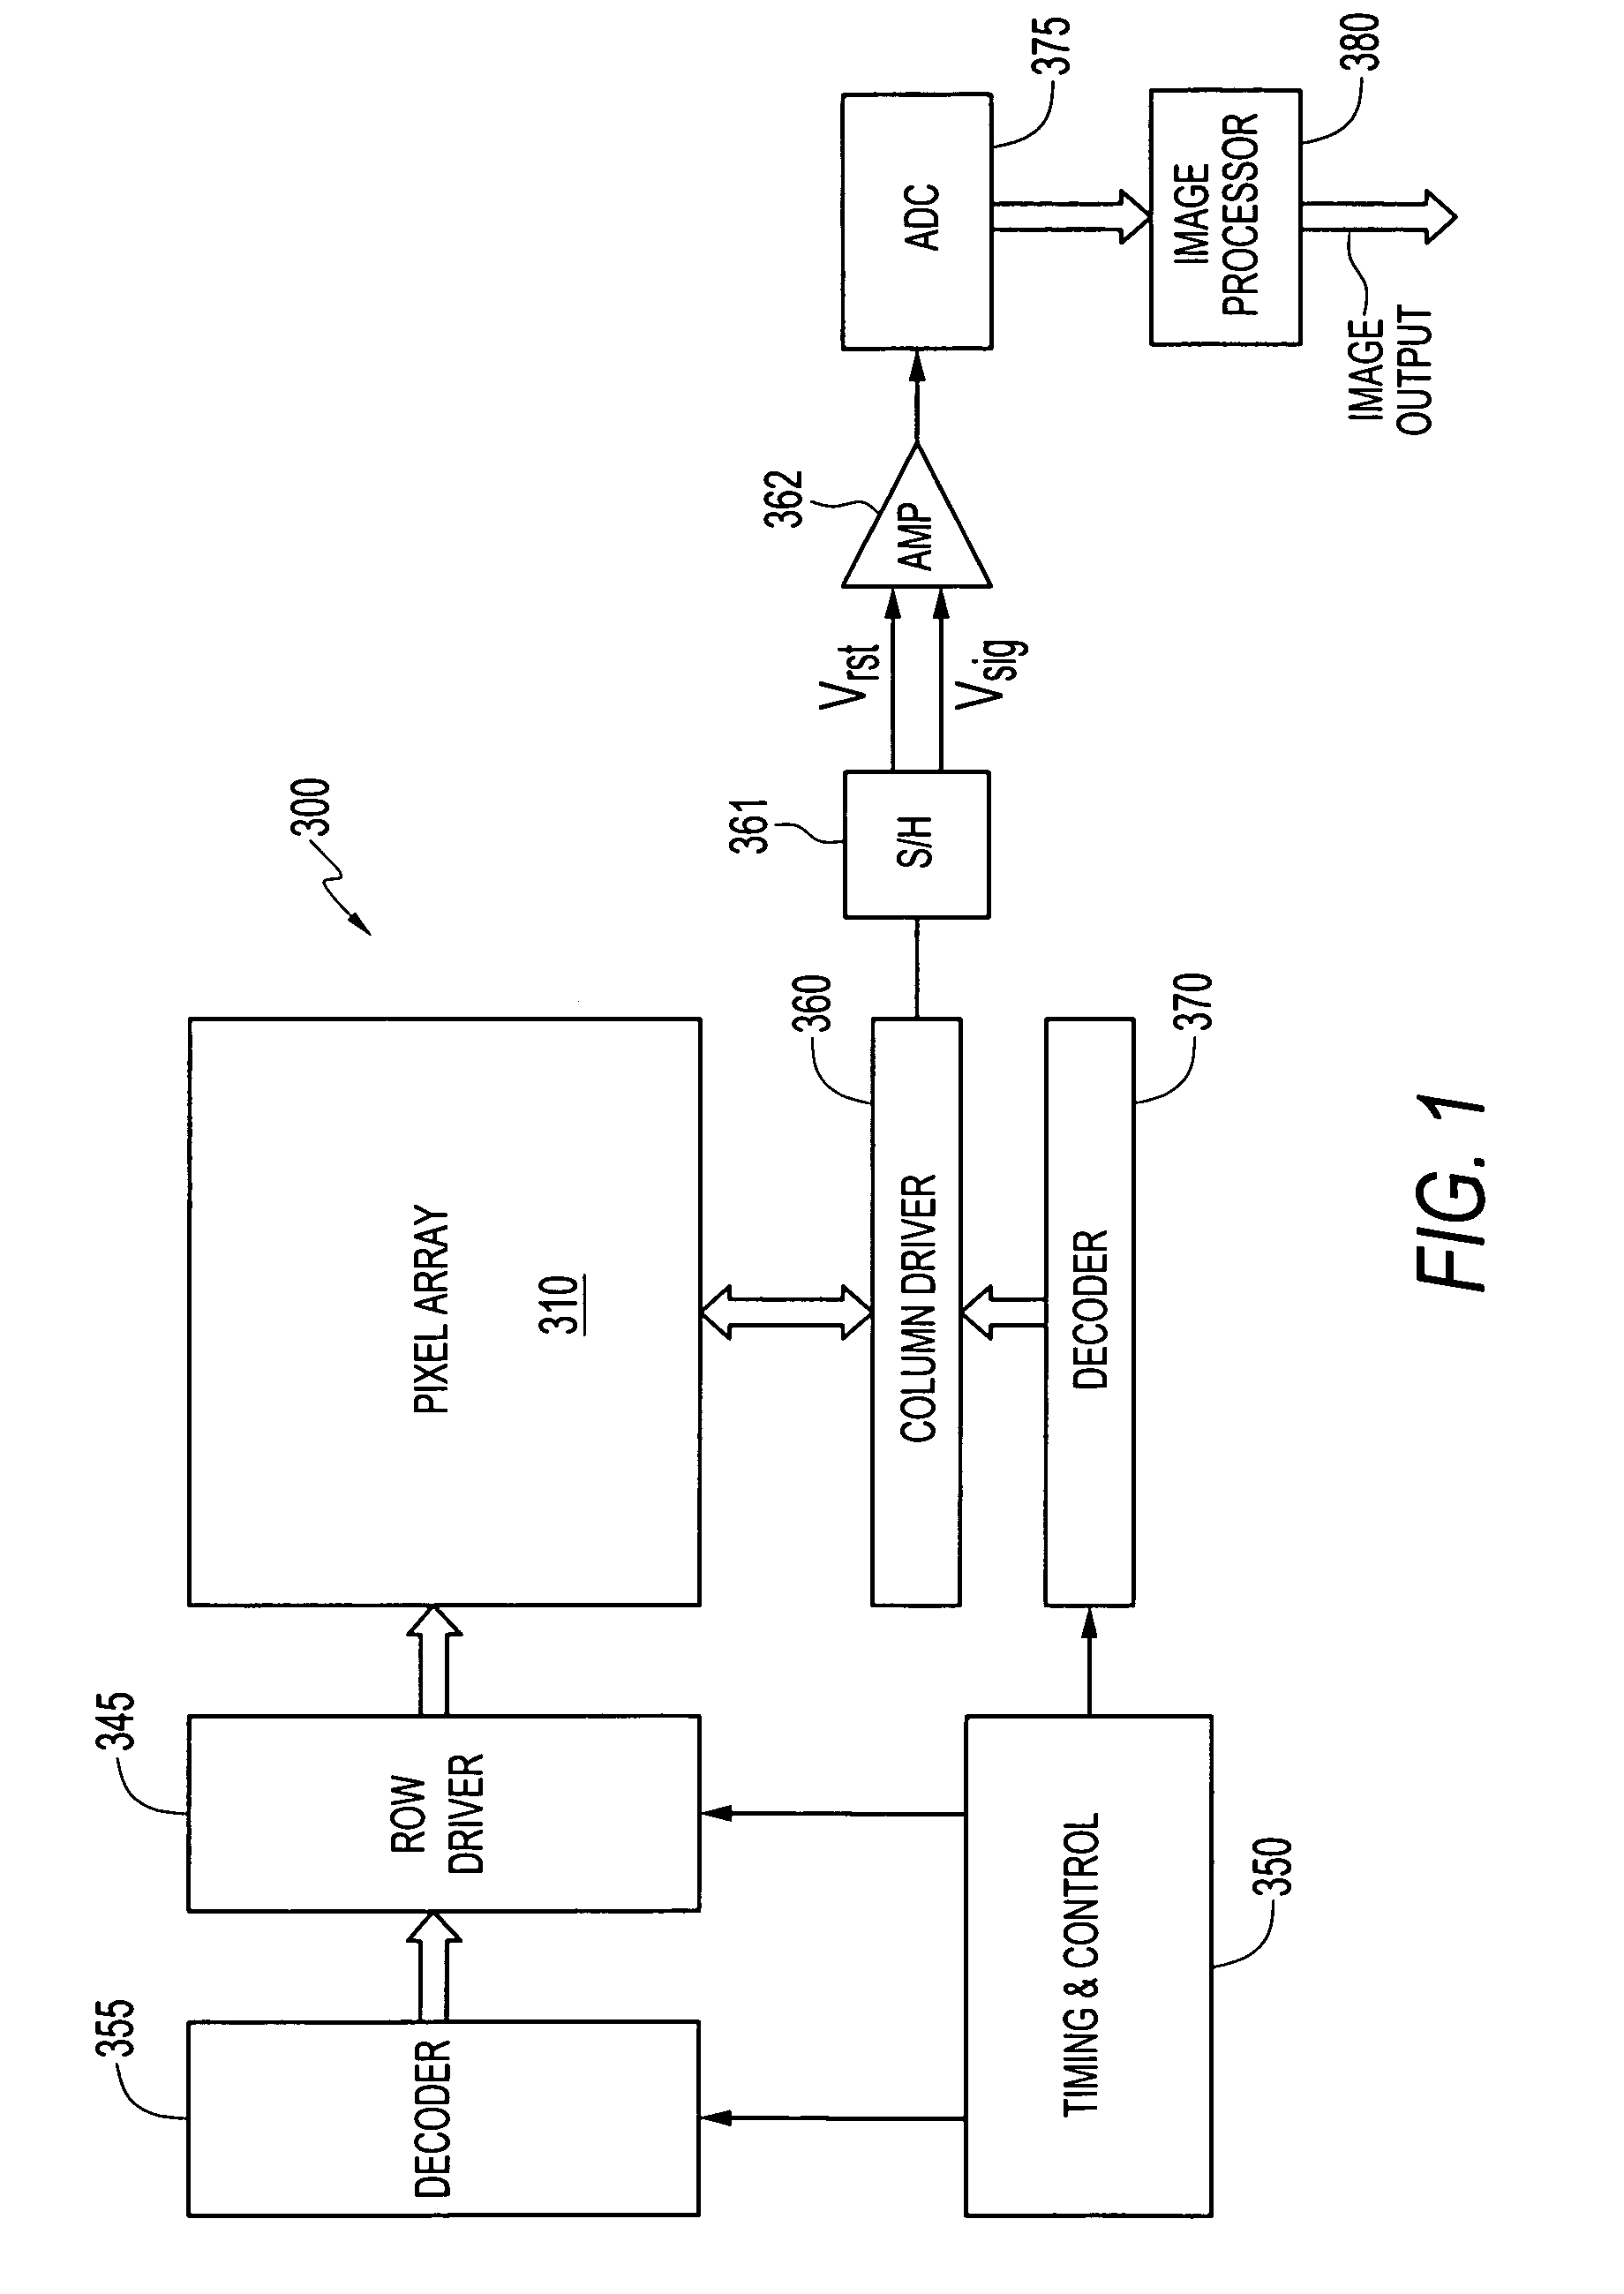 Pixel cell isolation of charge storage and floating diffusion regions using doped wells